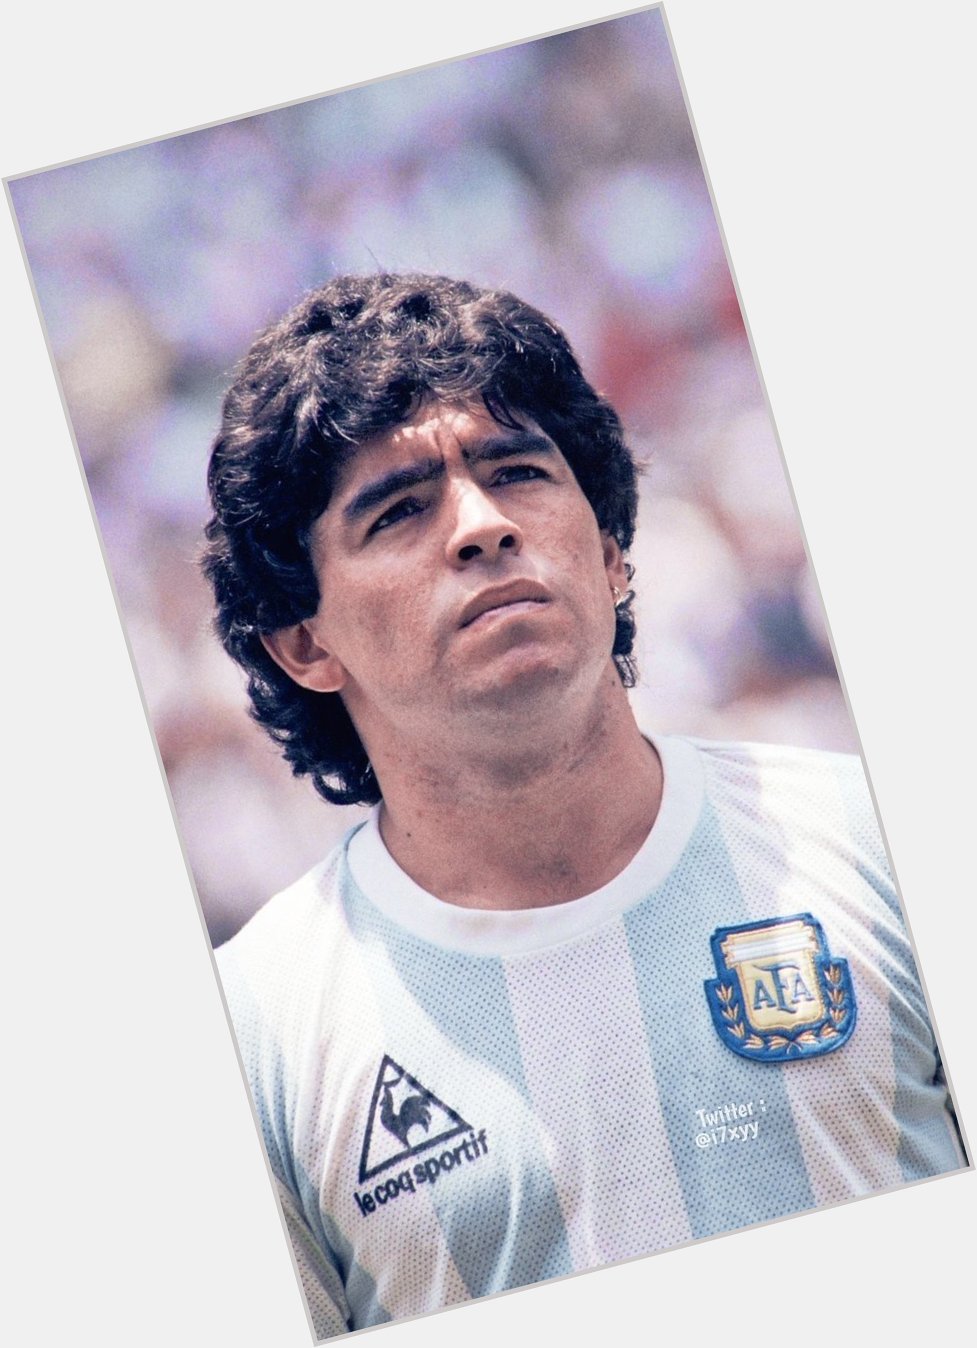 Happy birthday to the one and only Diego Armando Maradona, one of the greatest players in football history. 